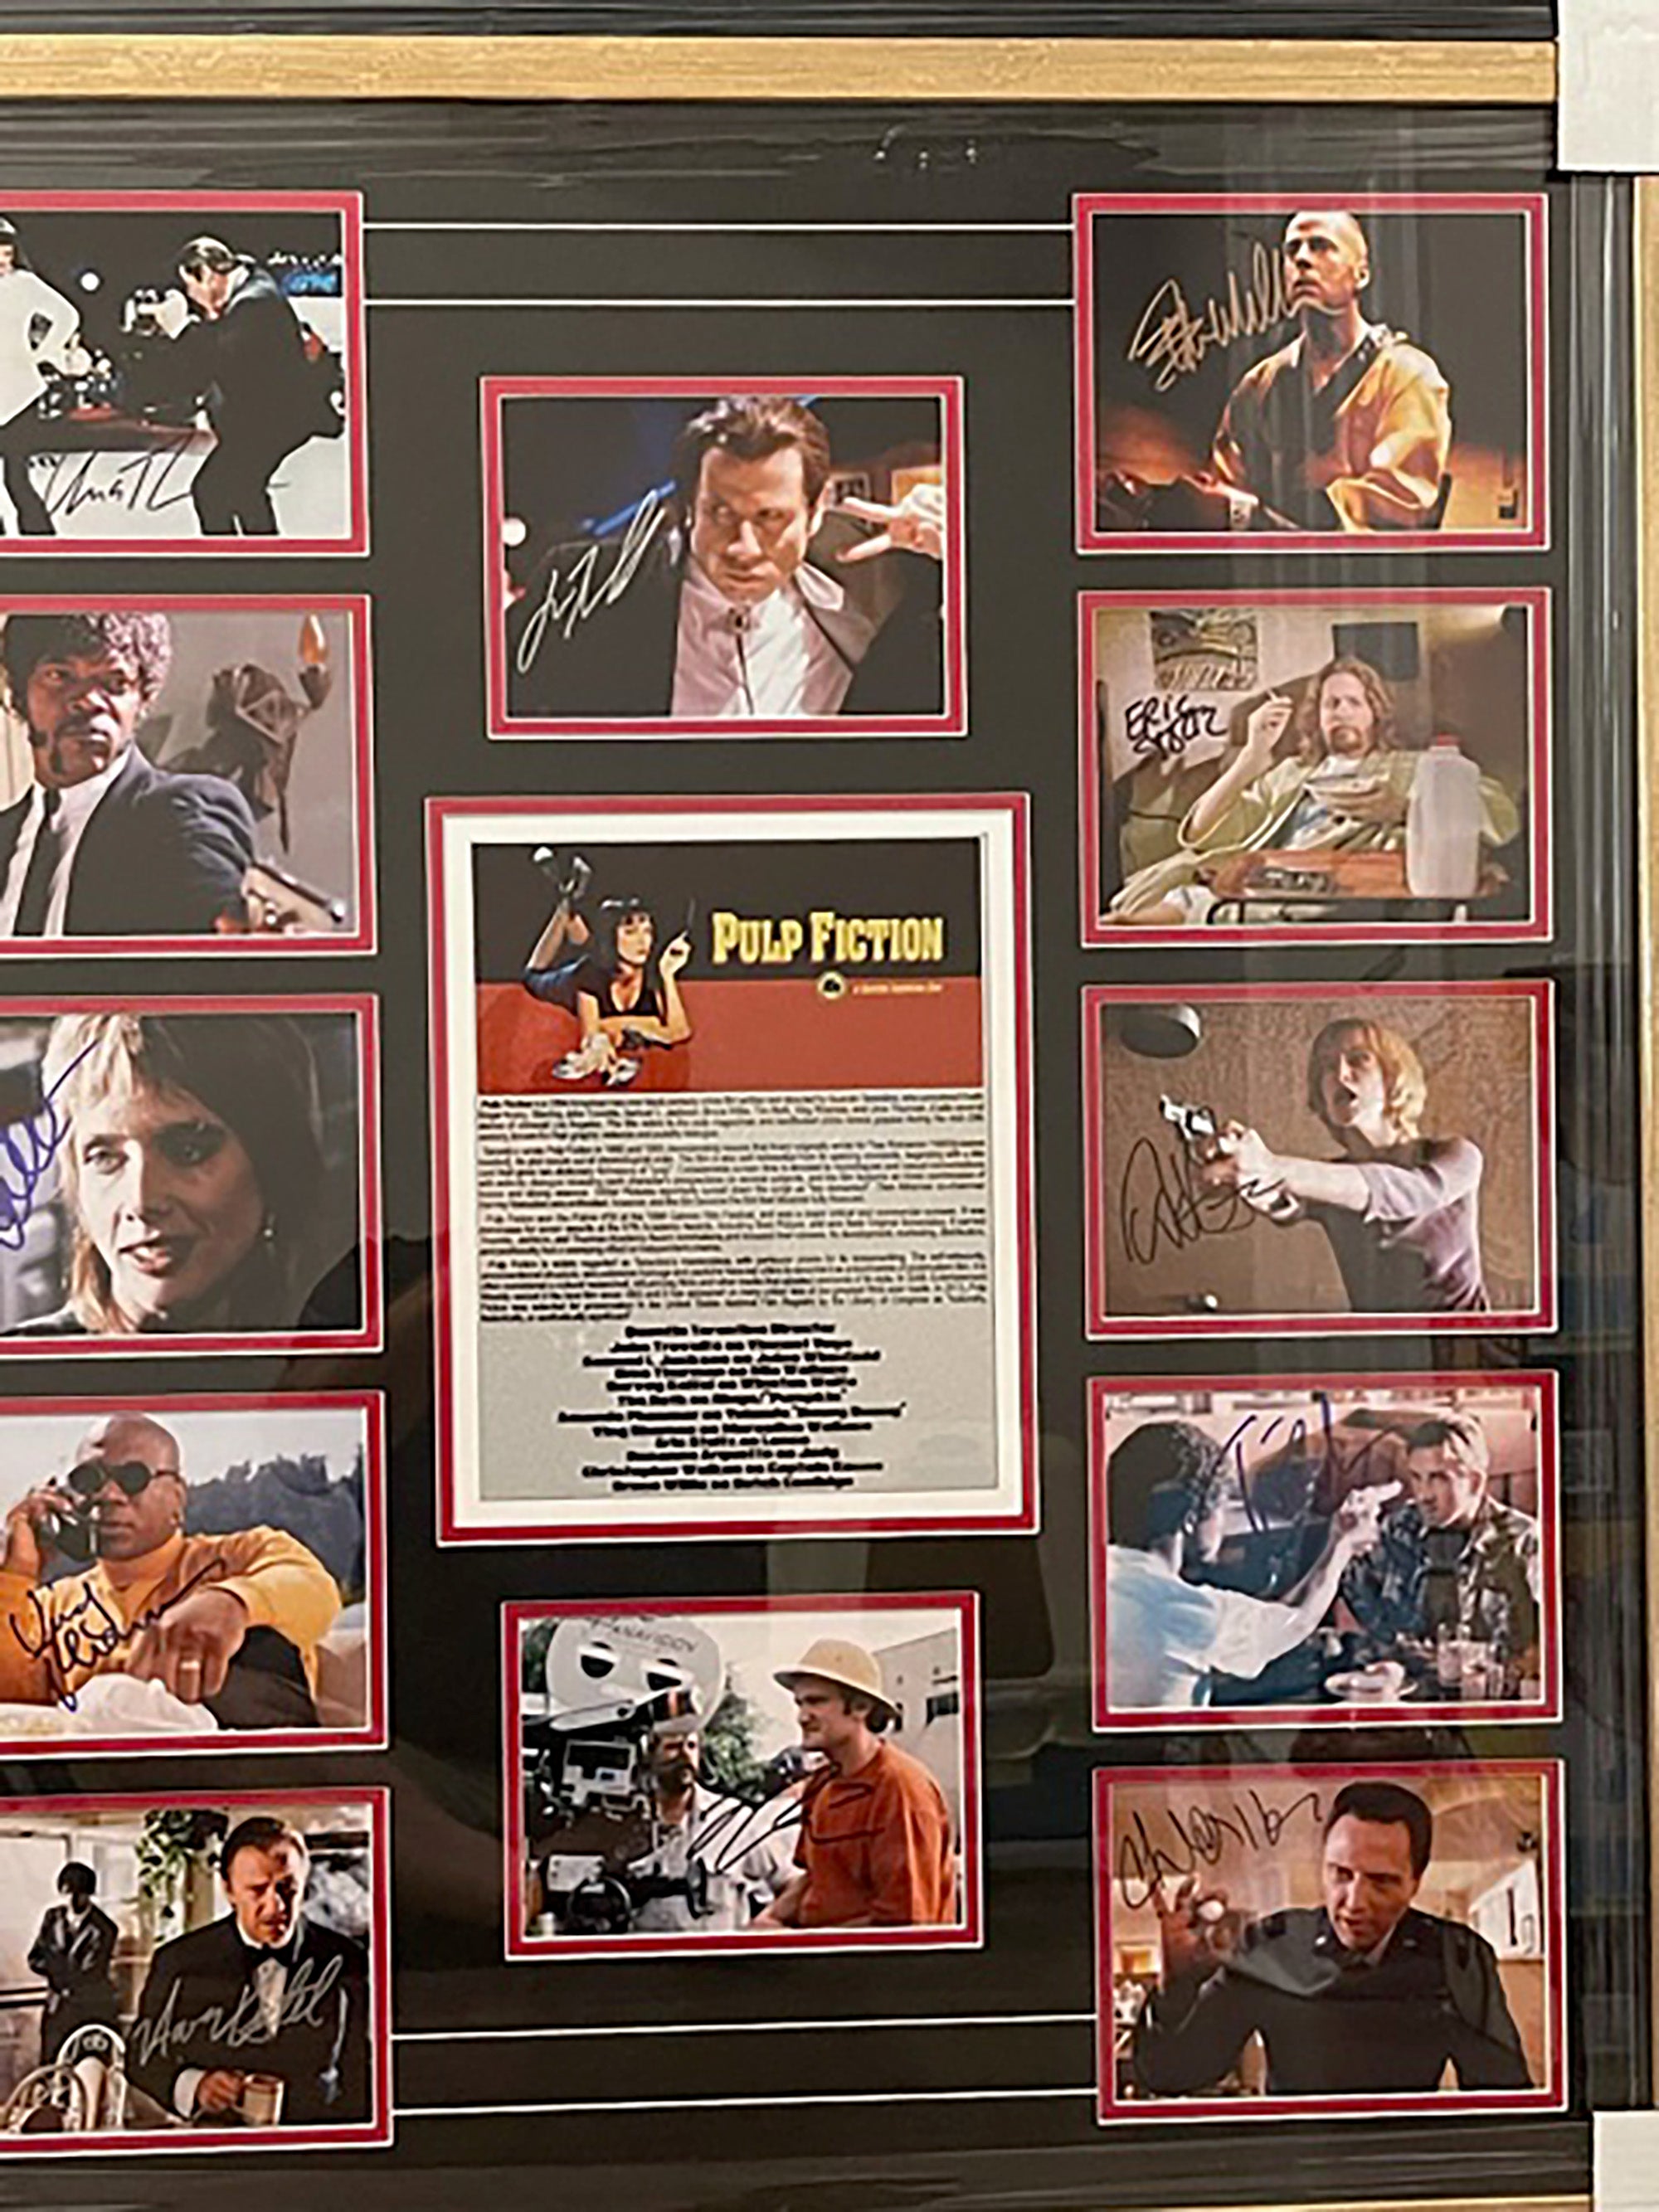 Quentin Tarantino, Uma Thurman, John Travolta, Pulp Fiction cast signed and framed photo collection with proof